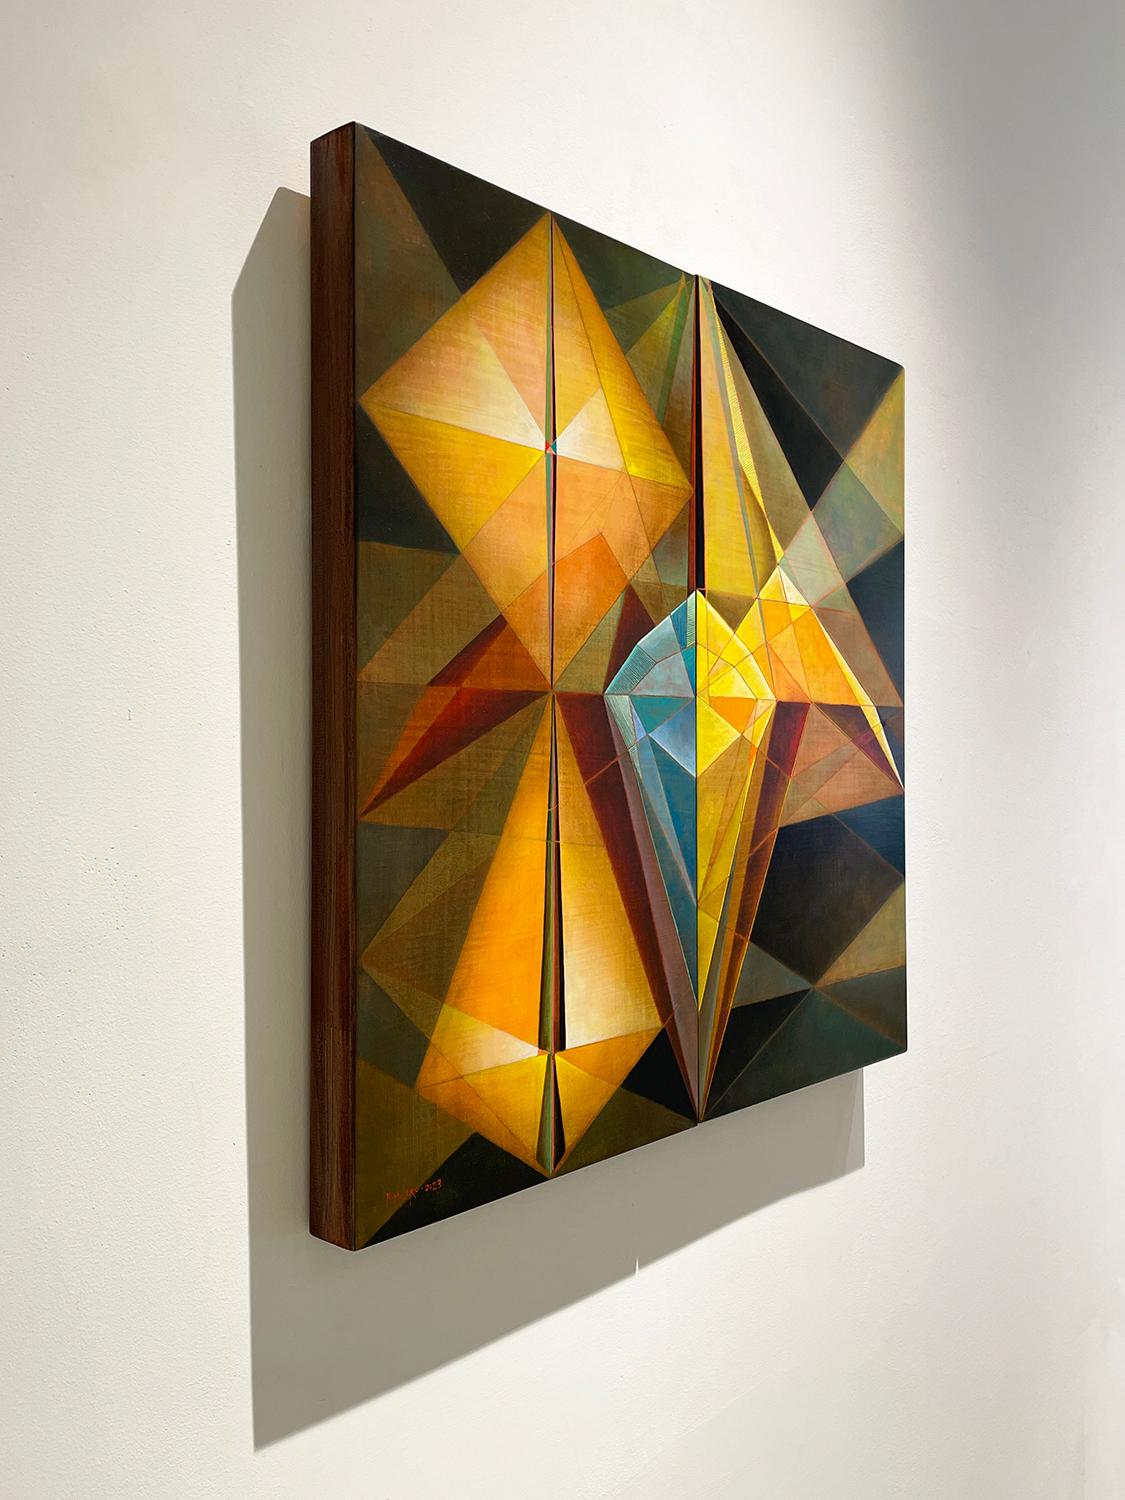 Iris (Contemporary Abstract Geometric Painting, Diptych in Oil) by Ricardo Mulero
24 x 24.5 x 1.75 inches
Oil on Two Panels
No frame necessary
Signed on bottom left corner

Contemporary Hard Edge Abstract Geometric Origami painting in oil on two